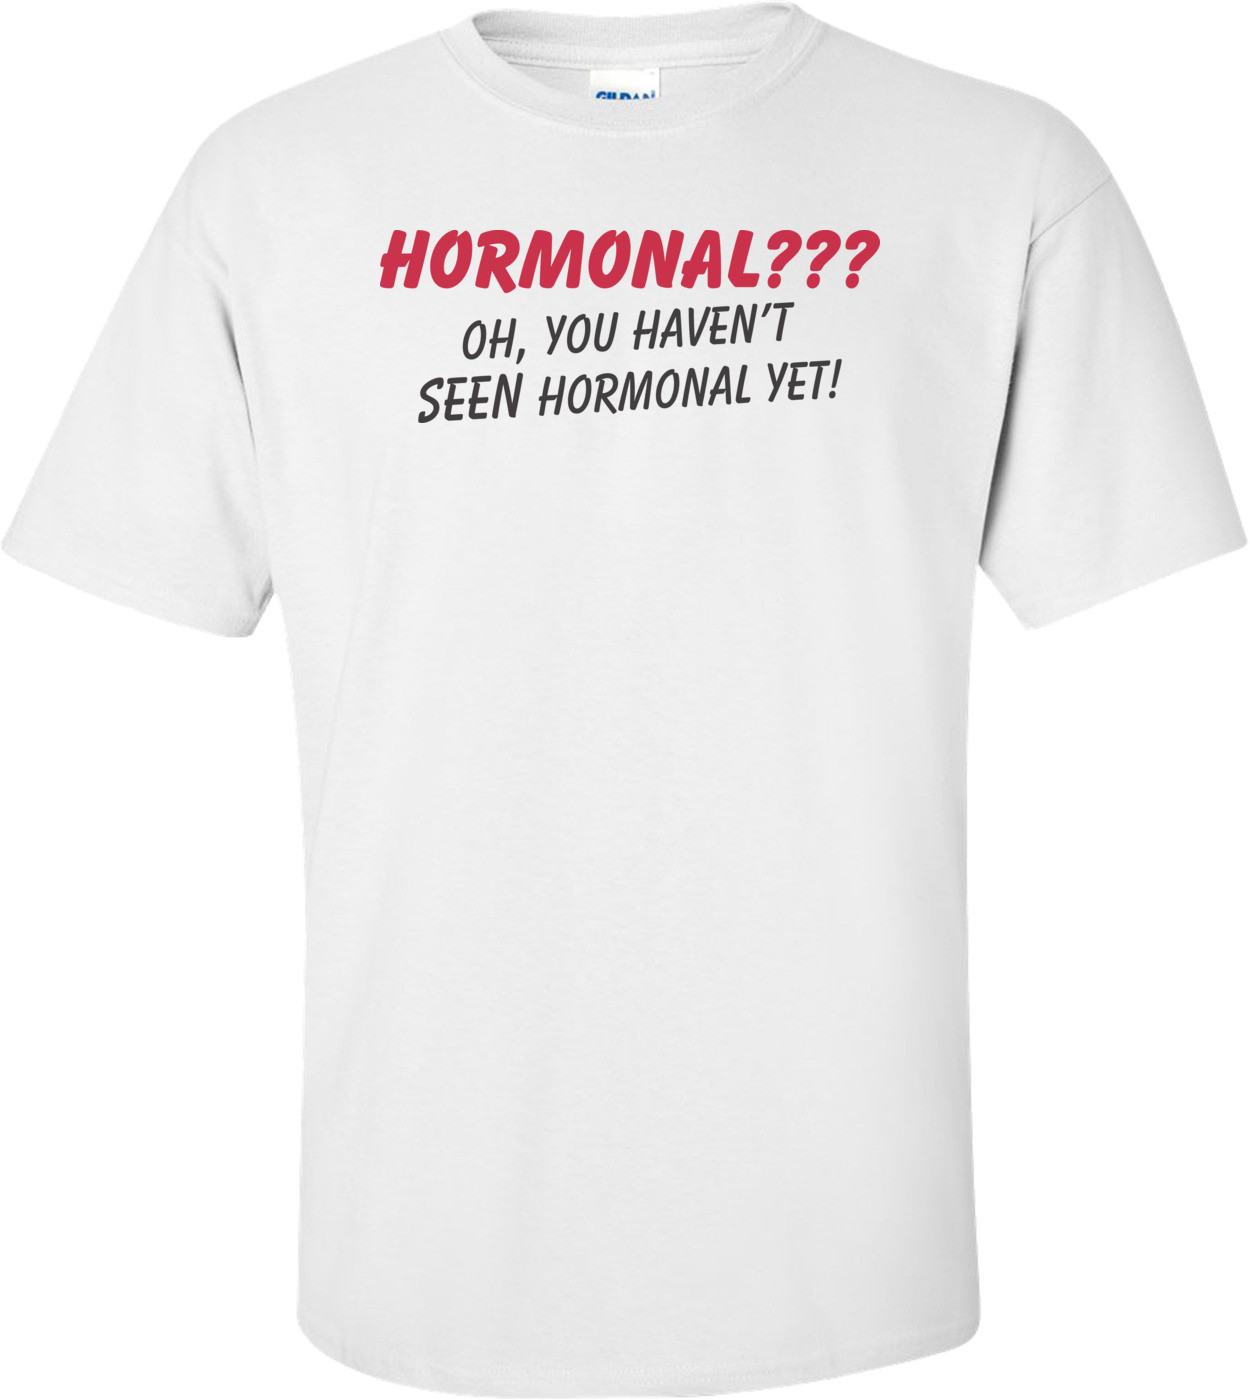 Hormonal? Oh, You Haven't Seen Hormonal Yet! Maternity Shirt